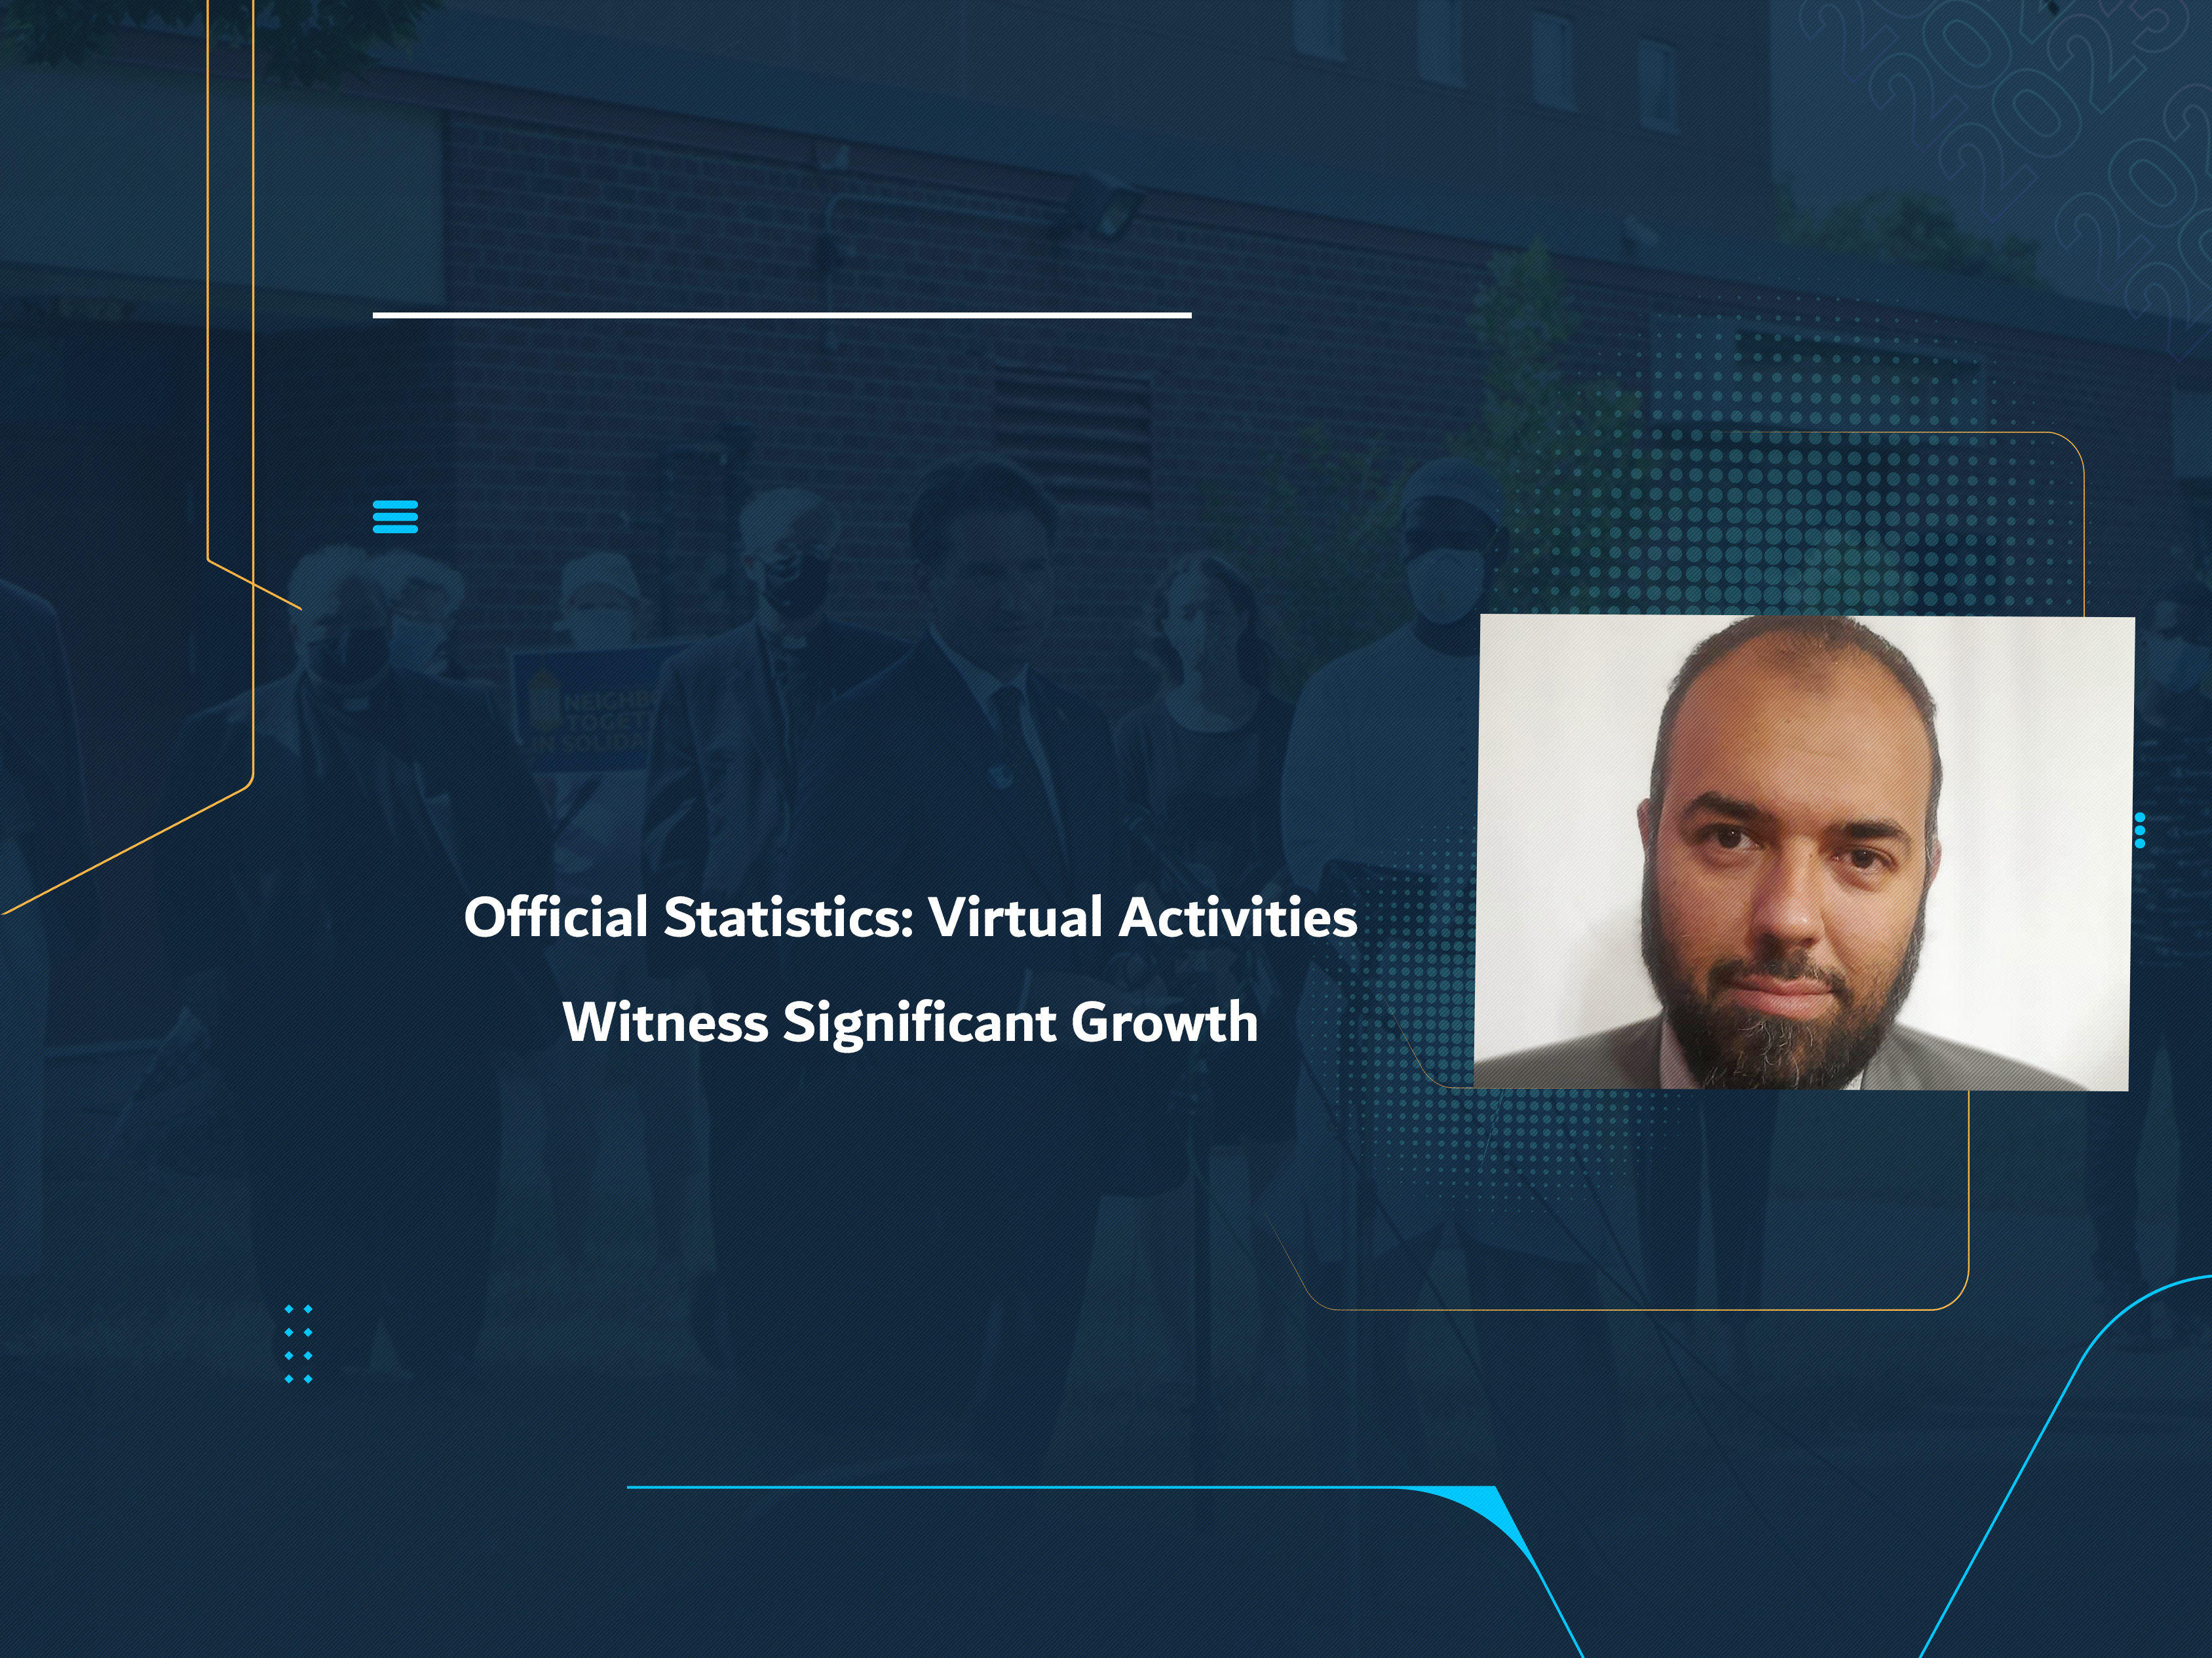 Official Statistics: Virtual Activities Witness Significant Growth